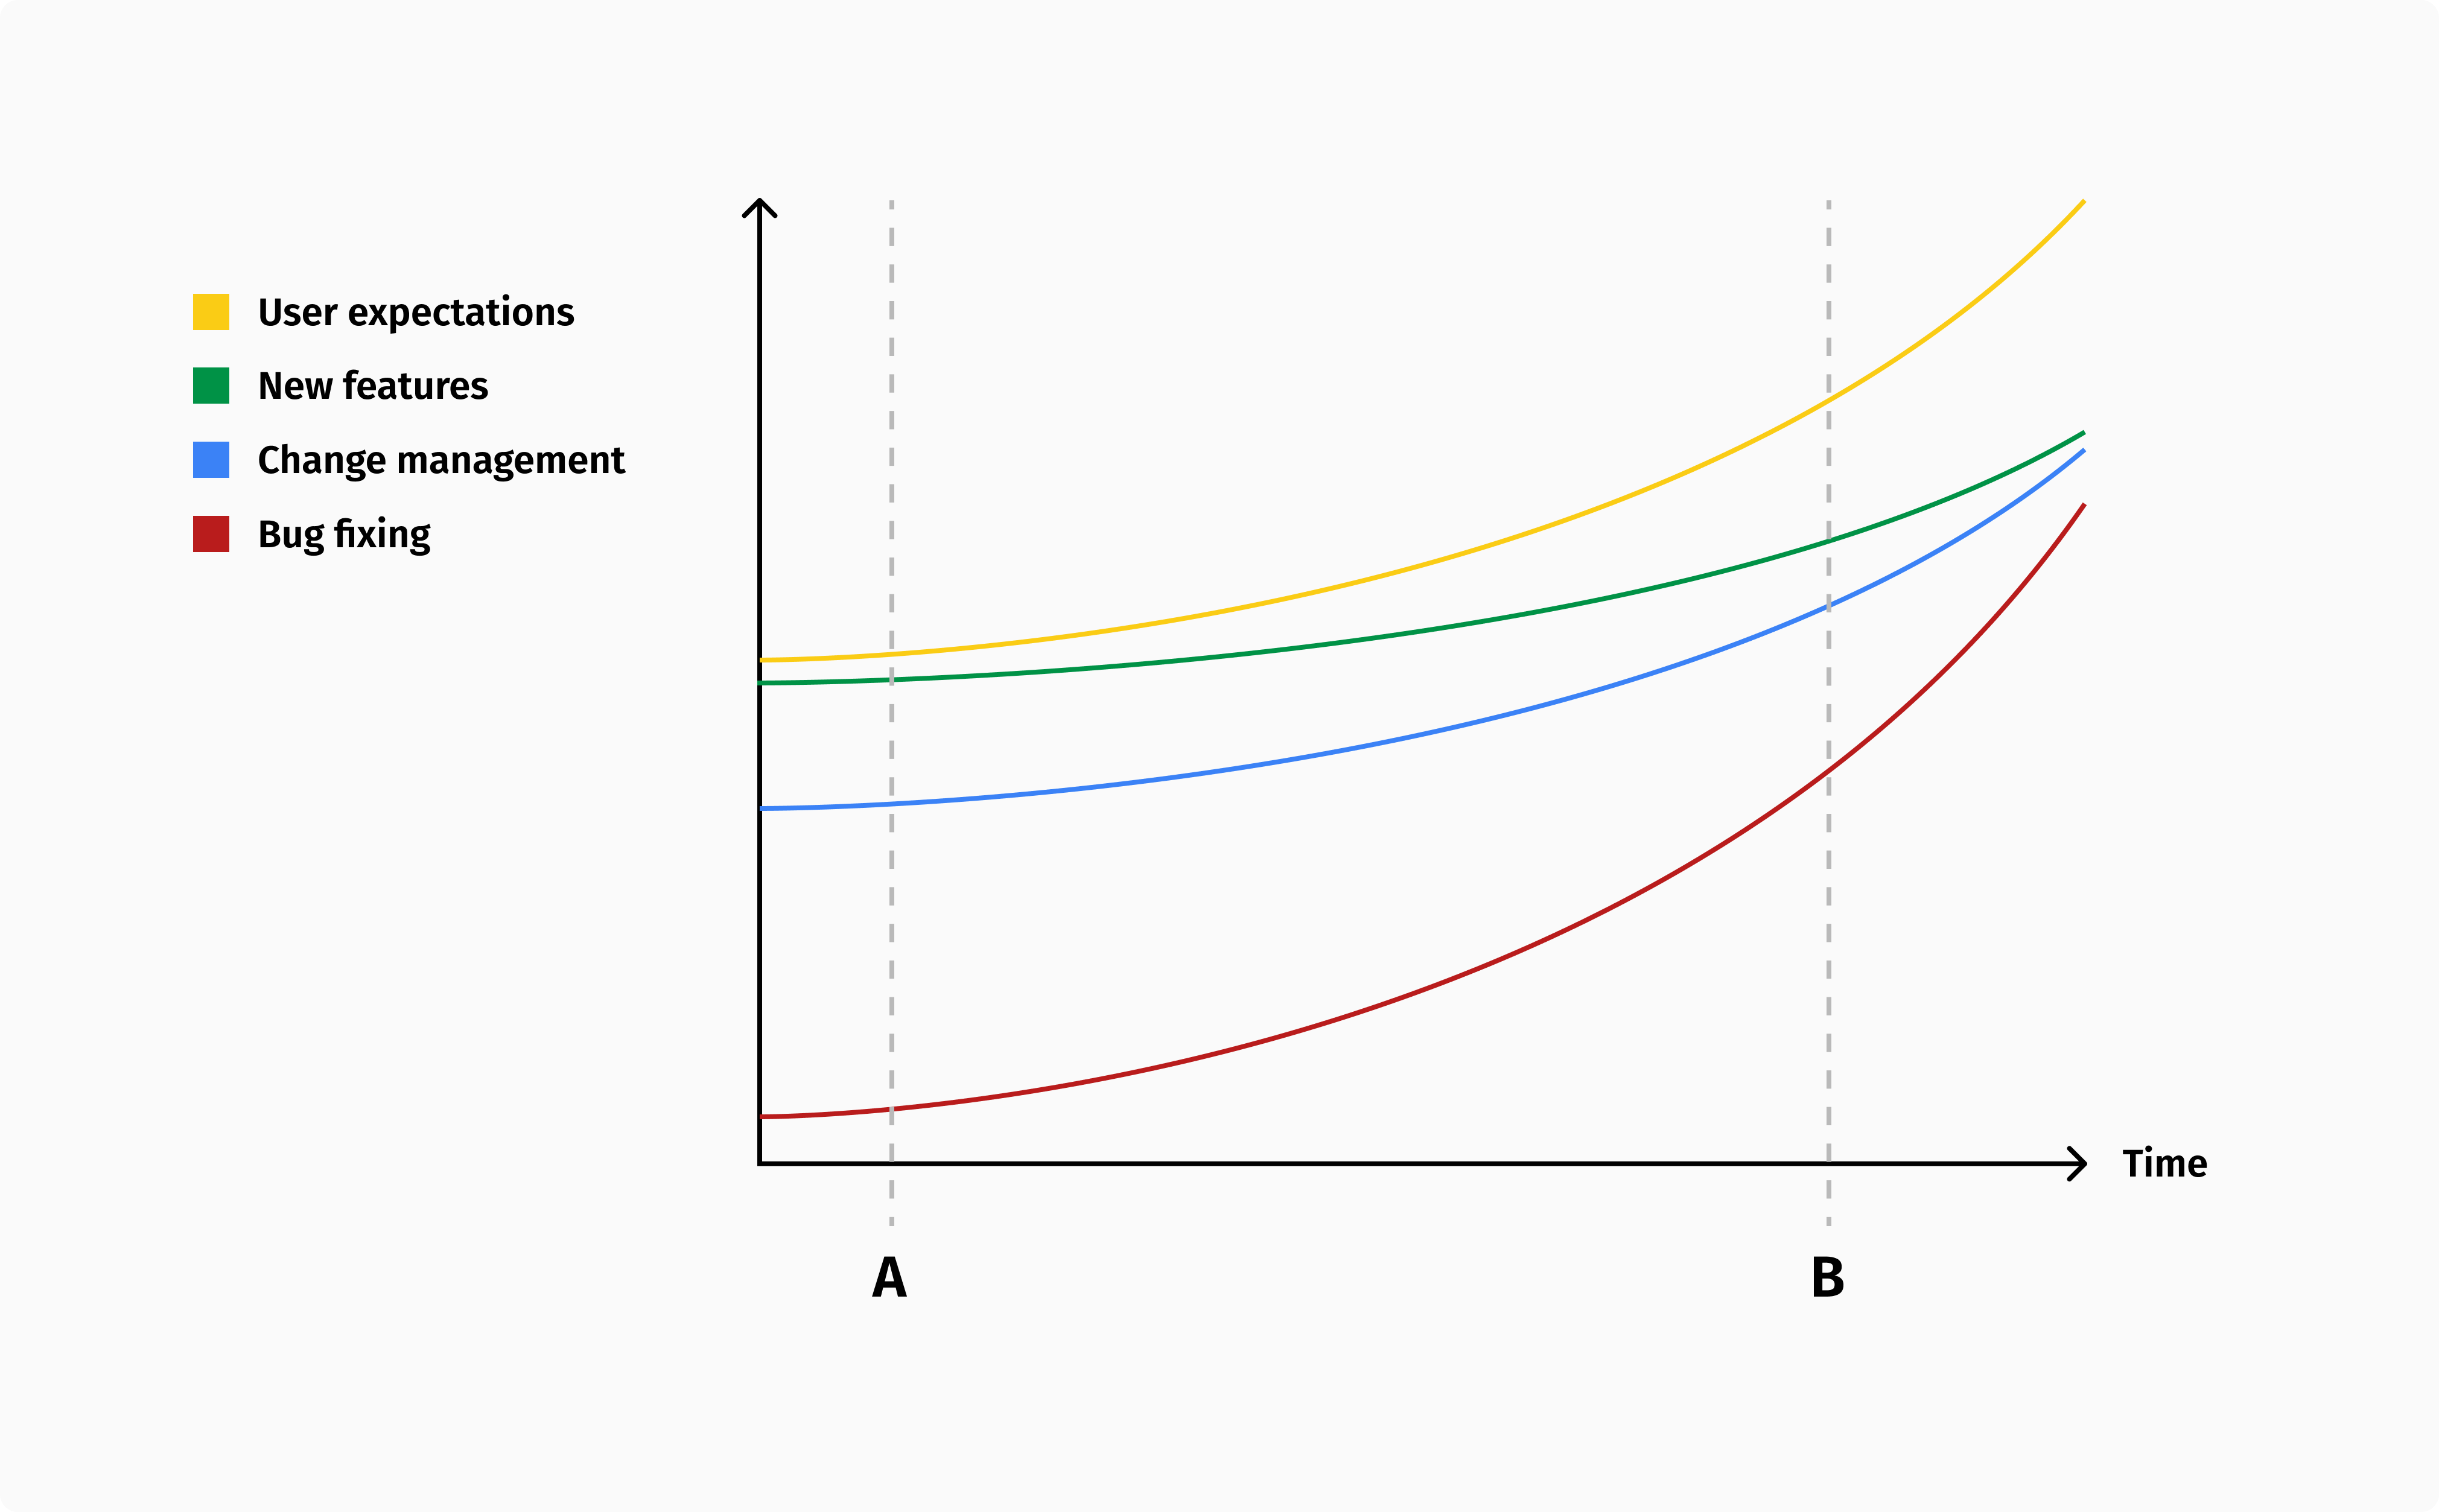 Software development cost compared to customer expectations.